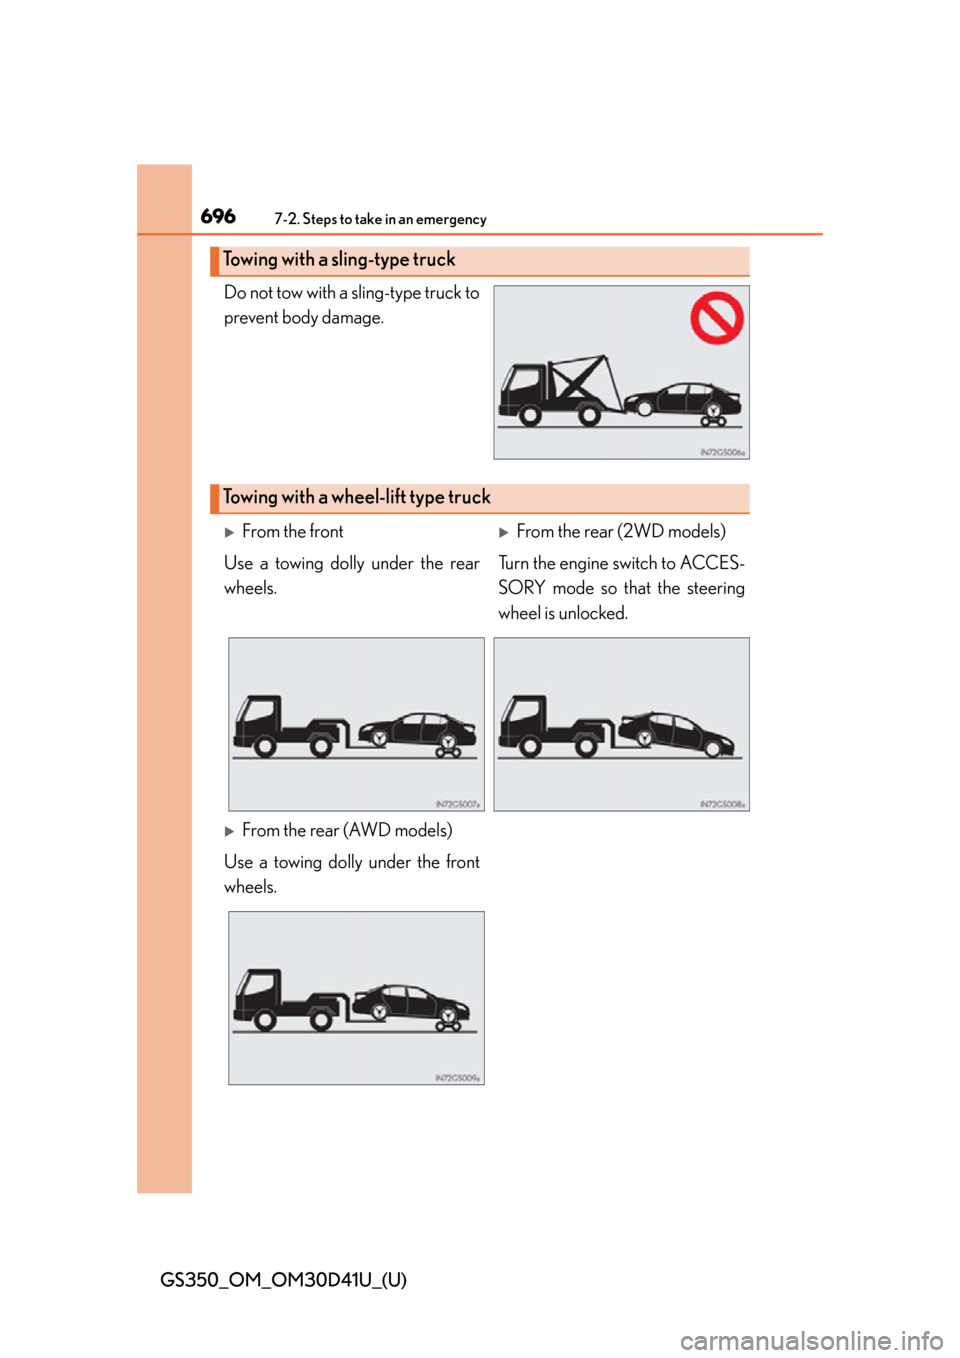 Lexus GS350 2014  Do-it-yourself maintenance / LEXUS 2014 GS350 OWNERS MANUAL (OM30D41U) 6967-2. Steps to take in an emergency
GS350_OM_OM30D41U_(U)Do not tow with a sling-type truck to
prevent body damage.
Towing with a sl
ing-type truck
Towing with a wheel -lift type truck
From the f